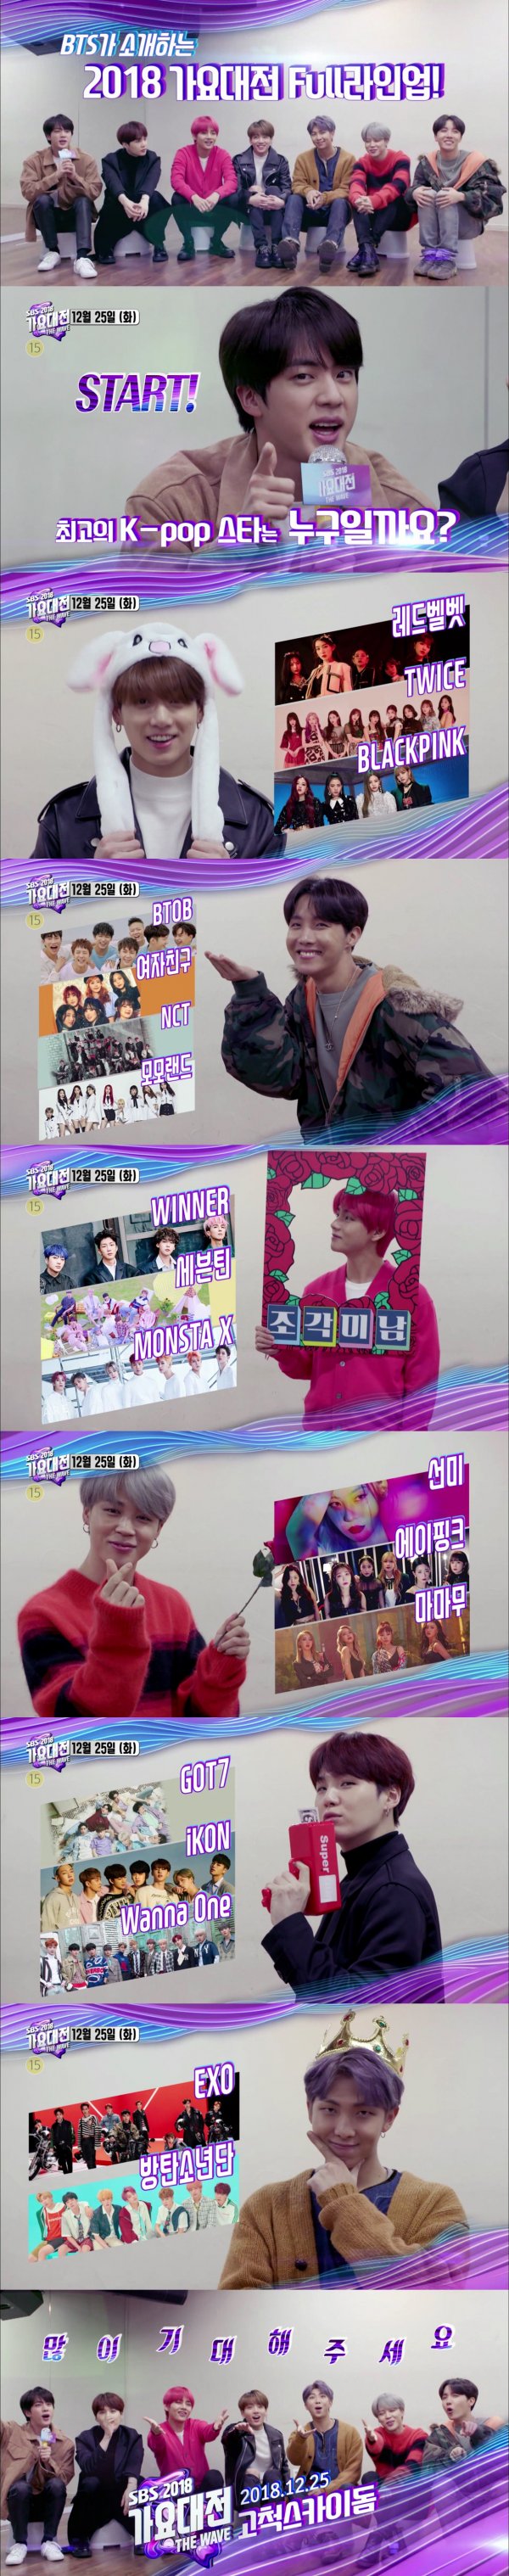 Today (9th) Inkigayo will unveil the FULL Lineup of 2018 SBS Song Daejeon, which BTS introduces.Following the release of the first and second lineup of the 2018 SBS Song Daejeon, this time BTS will appear as a guide to introduce the entire lineup.BTS Jean raised the expectation of 2018 SBS Song Daejeon with the question Who is the best k-pop star of the year?These days, Jung Guk, who wore a nuclear-in-the-tem rabbit hat, announced the appearance of Red Velvet, Twice, Black Pink, and the smile angel Jay Hop of Bitoo, Girlfriend, NCT, Momo Land, and the sculpted man Buga of Winner, Seventeen, and Monster X.Ji Min, who was shooting a woman with a cute heart, introduced Stern, A Pink, Mama, GOT7, iKON, Wanna One with money gun, and EXO, BTS with a strong eldest brother RM.This is the completion of the previous-class lineup of 18 teams of k-pop stars in Koreas Choi Jing Award, which was named in the 2018 SBS Song Daejeon. The FULL Lineup video of the 2018 SBS Song Daejeon, which BTS introduces, will be released for the first time during the broadcast of Inkigayo today.Meanwhile, the 2018 SBS Song Daejeon, which will come as a Christmas gift on the 25th (Tuesday), will look at the flow of K-POP and Hallyu with singers who have reached their peaks by writing numerous records during the year under the theme of THE WAVE.The 2018 SBS Song Daejeon, the biggest festival of the year, will be broadcast live on the 25th (Fahrenheit) at the Gocheok Sky Dome in Seoul.